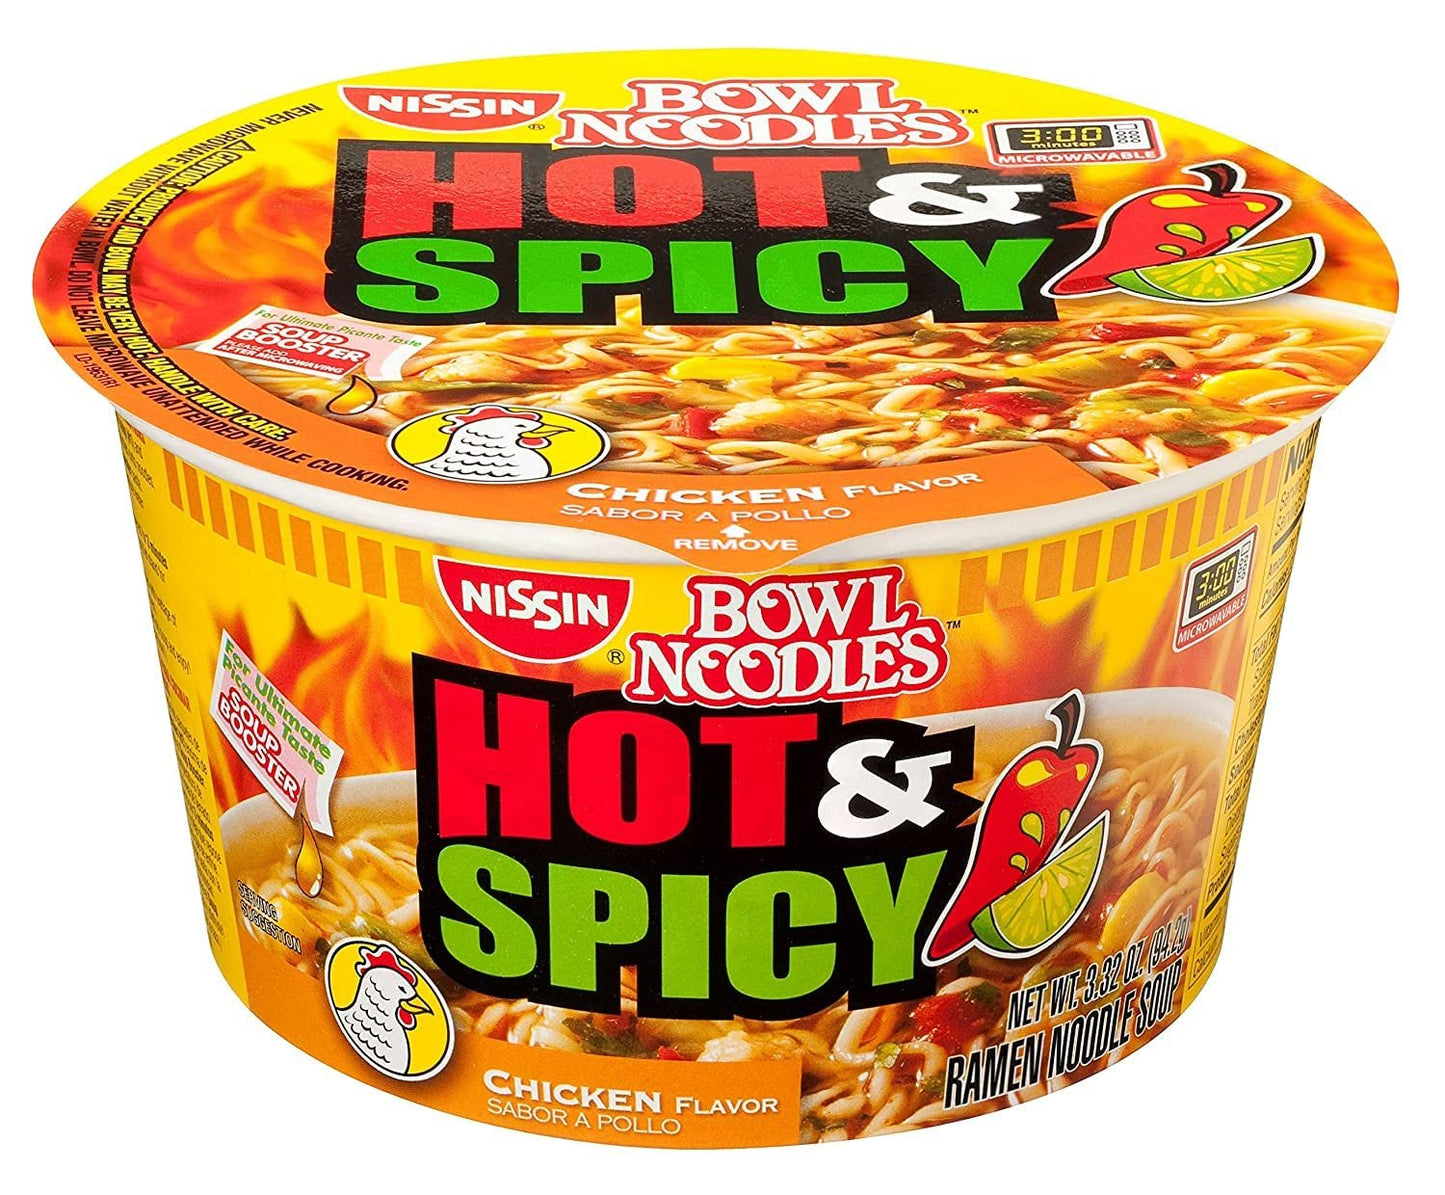 Nissin Cup Noodles Soup Instant Cup 12 Count, 6 Hot & Spicy Chicken Bowl, 6 Chicken Cup Lunch / Dinner Variety, 2 Flavors